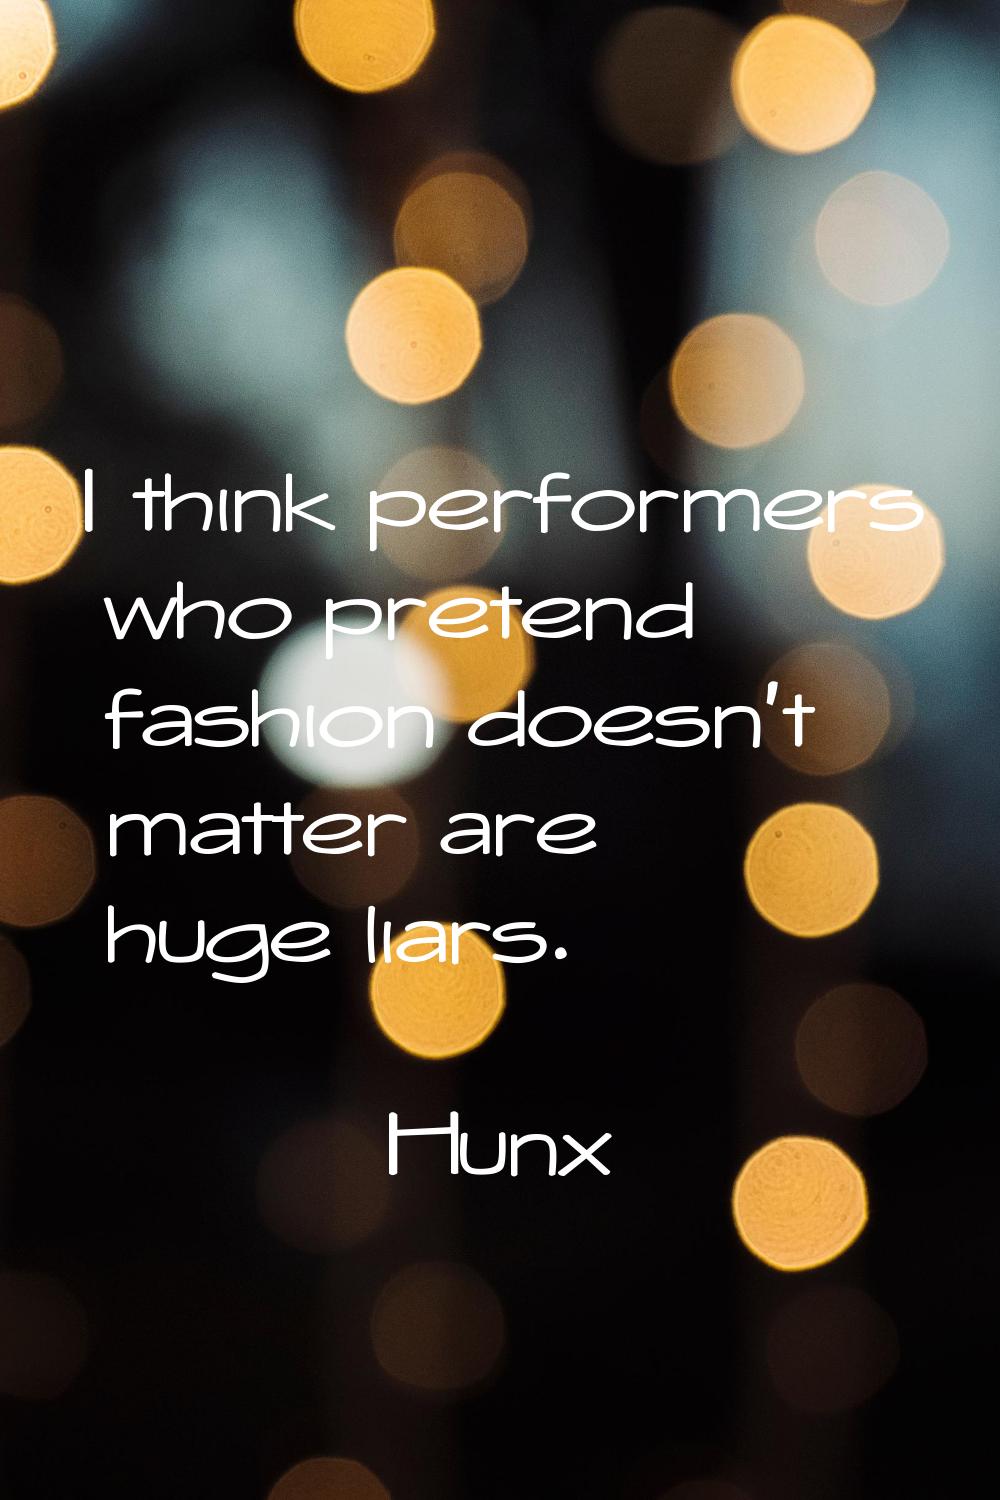 I think performers who pretend fashion doesn't matter are huge liars.